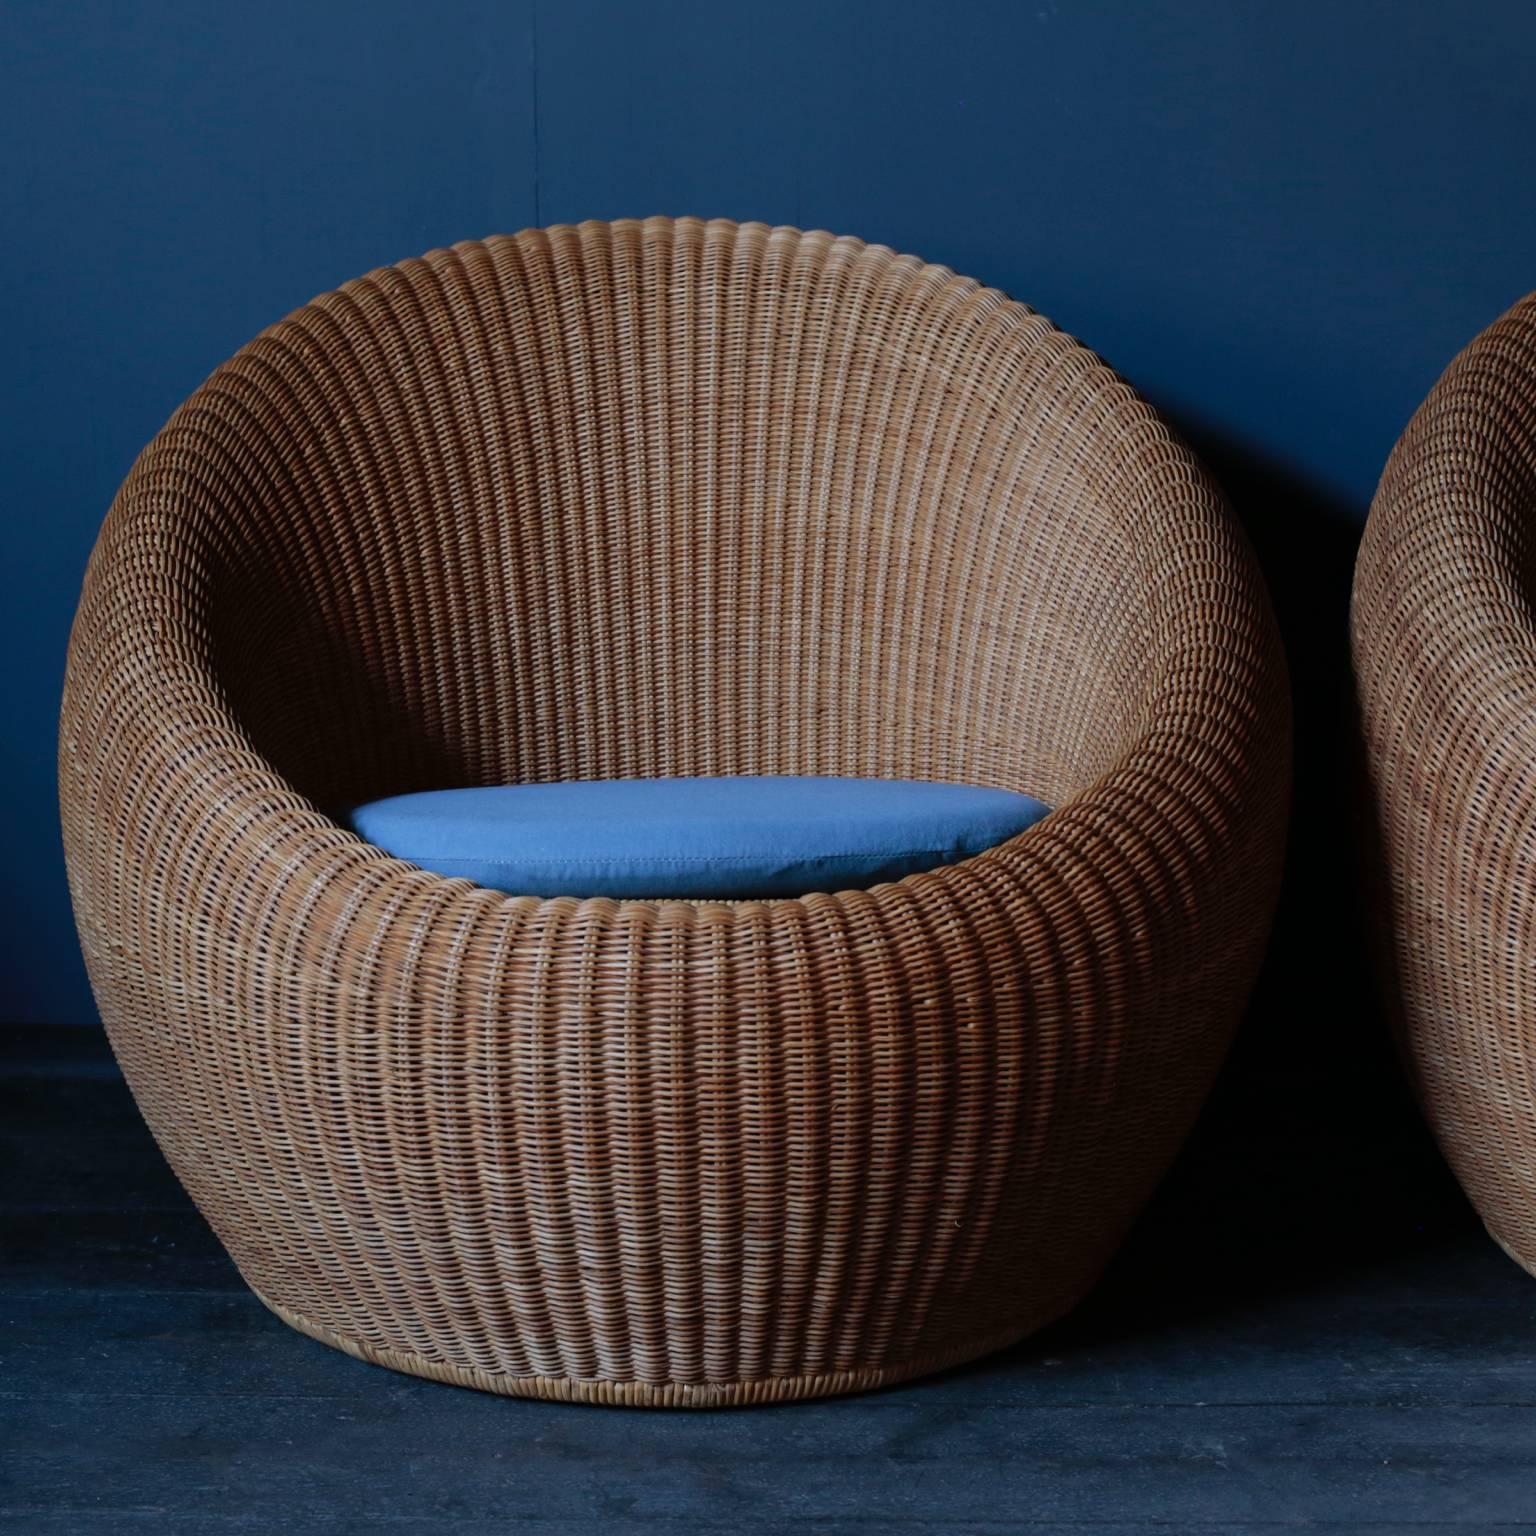 Isuamu Kenmochi for Yamakawa. Rare pair of Rattan chairs in excellent vintage condition.